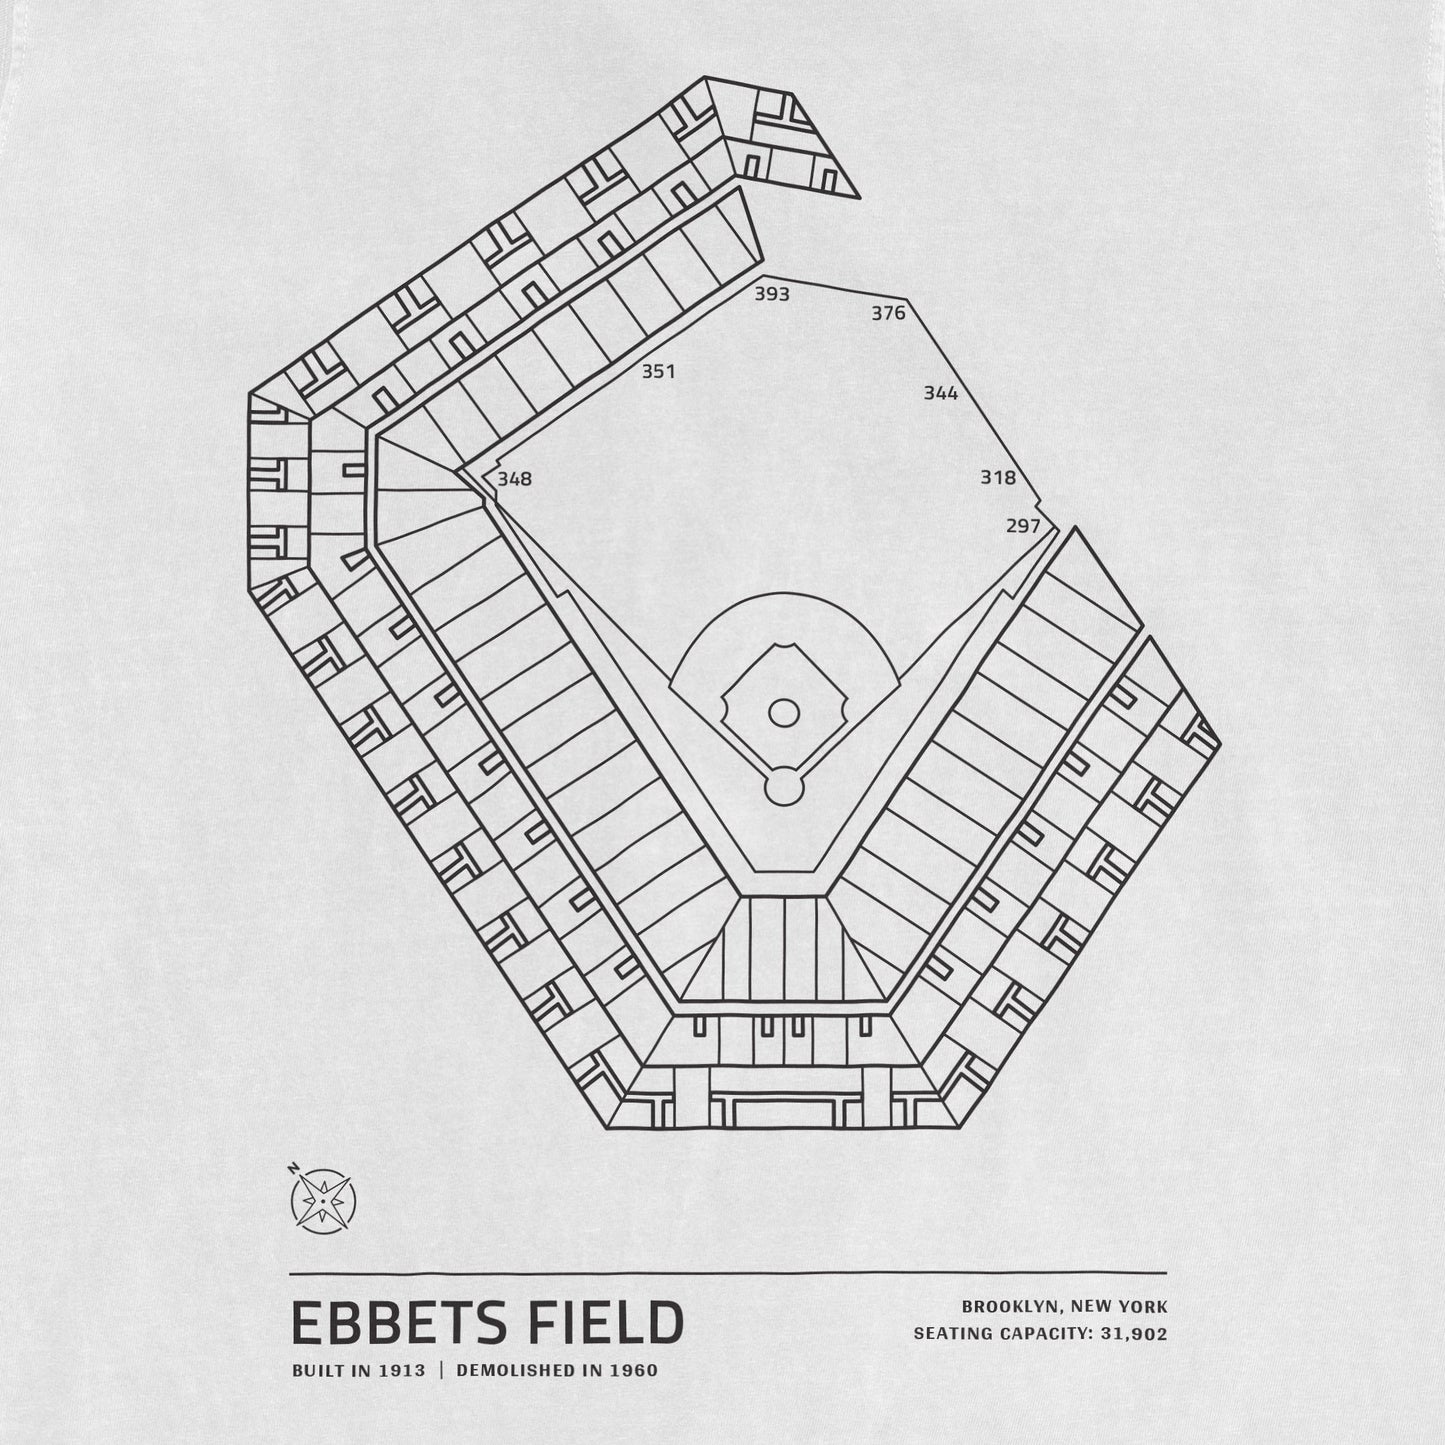 Ebbets Field - Stadium Collection | Comfort Colors® Vintage Tee